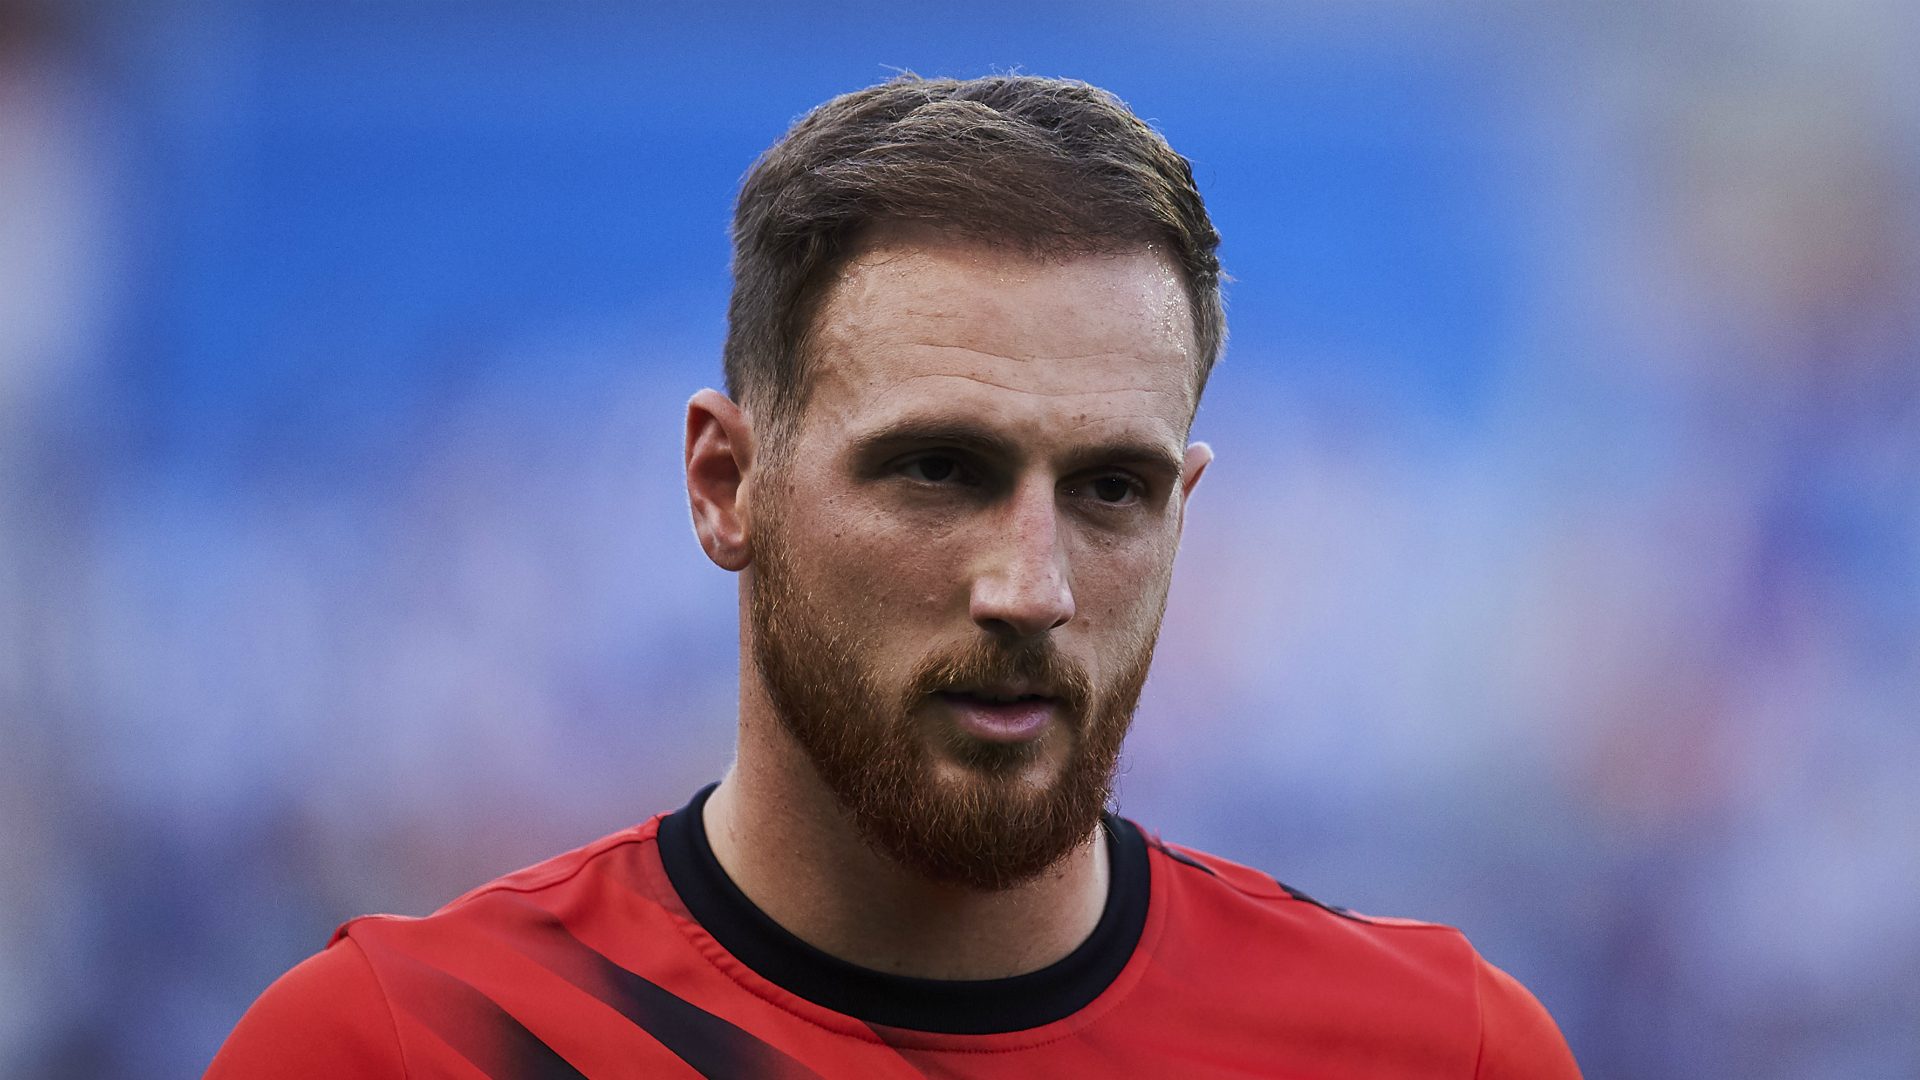 Jan Oblak could be a goalkeeper in demand over the coming weeks, but for now he is focused on Atletico Madrid's Champions League campaign.